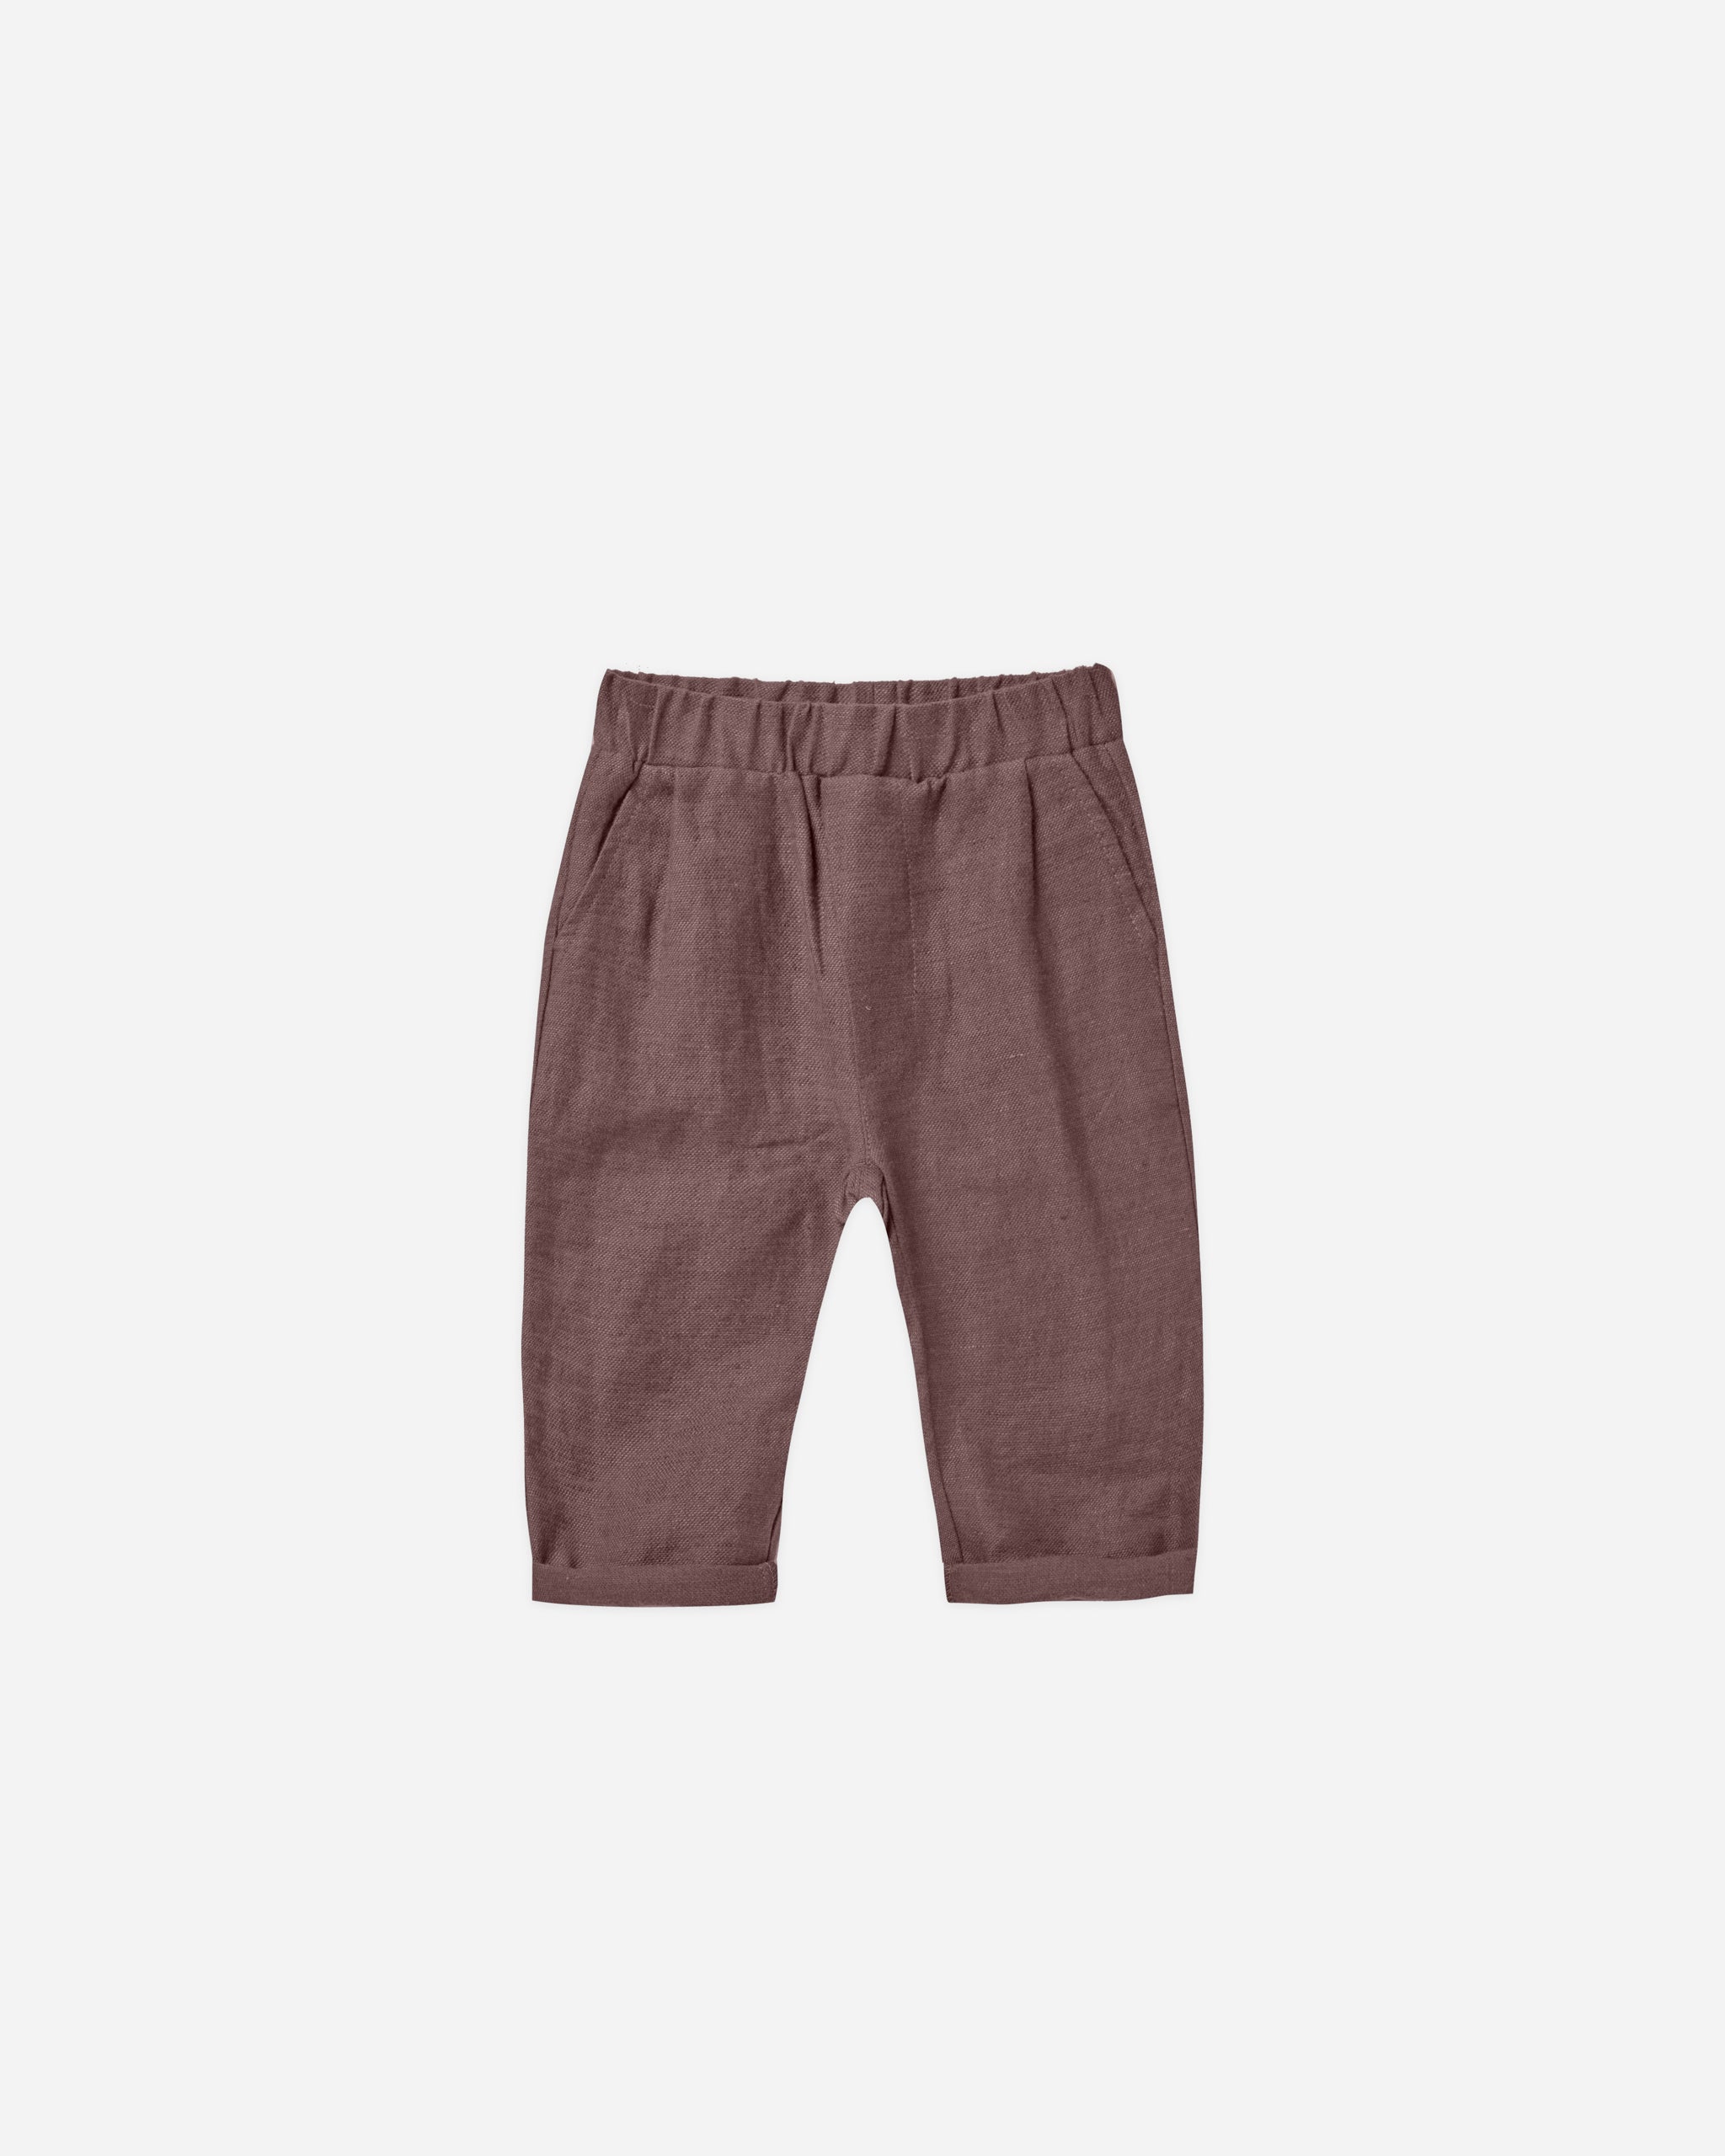 Otis Pant || Plum - Rylee + Cru | Kids Clothes | Trendy Baby Clothes | Modern Infant Outfits |